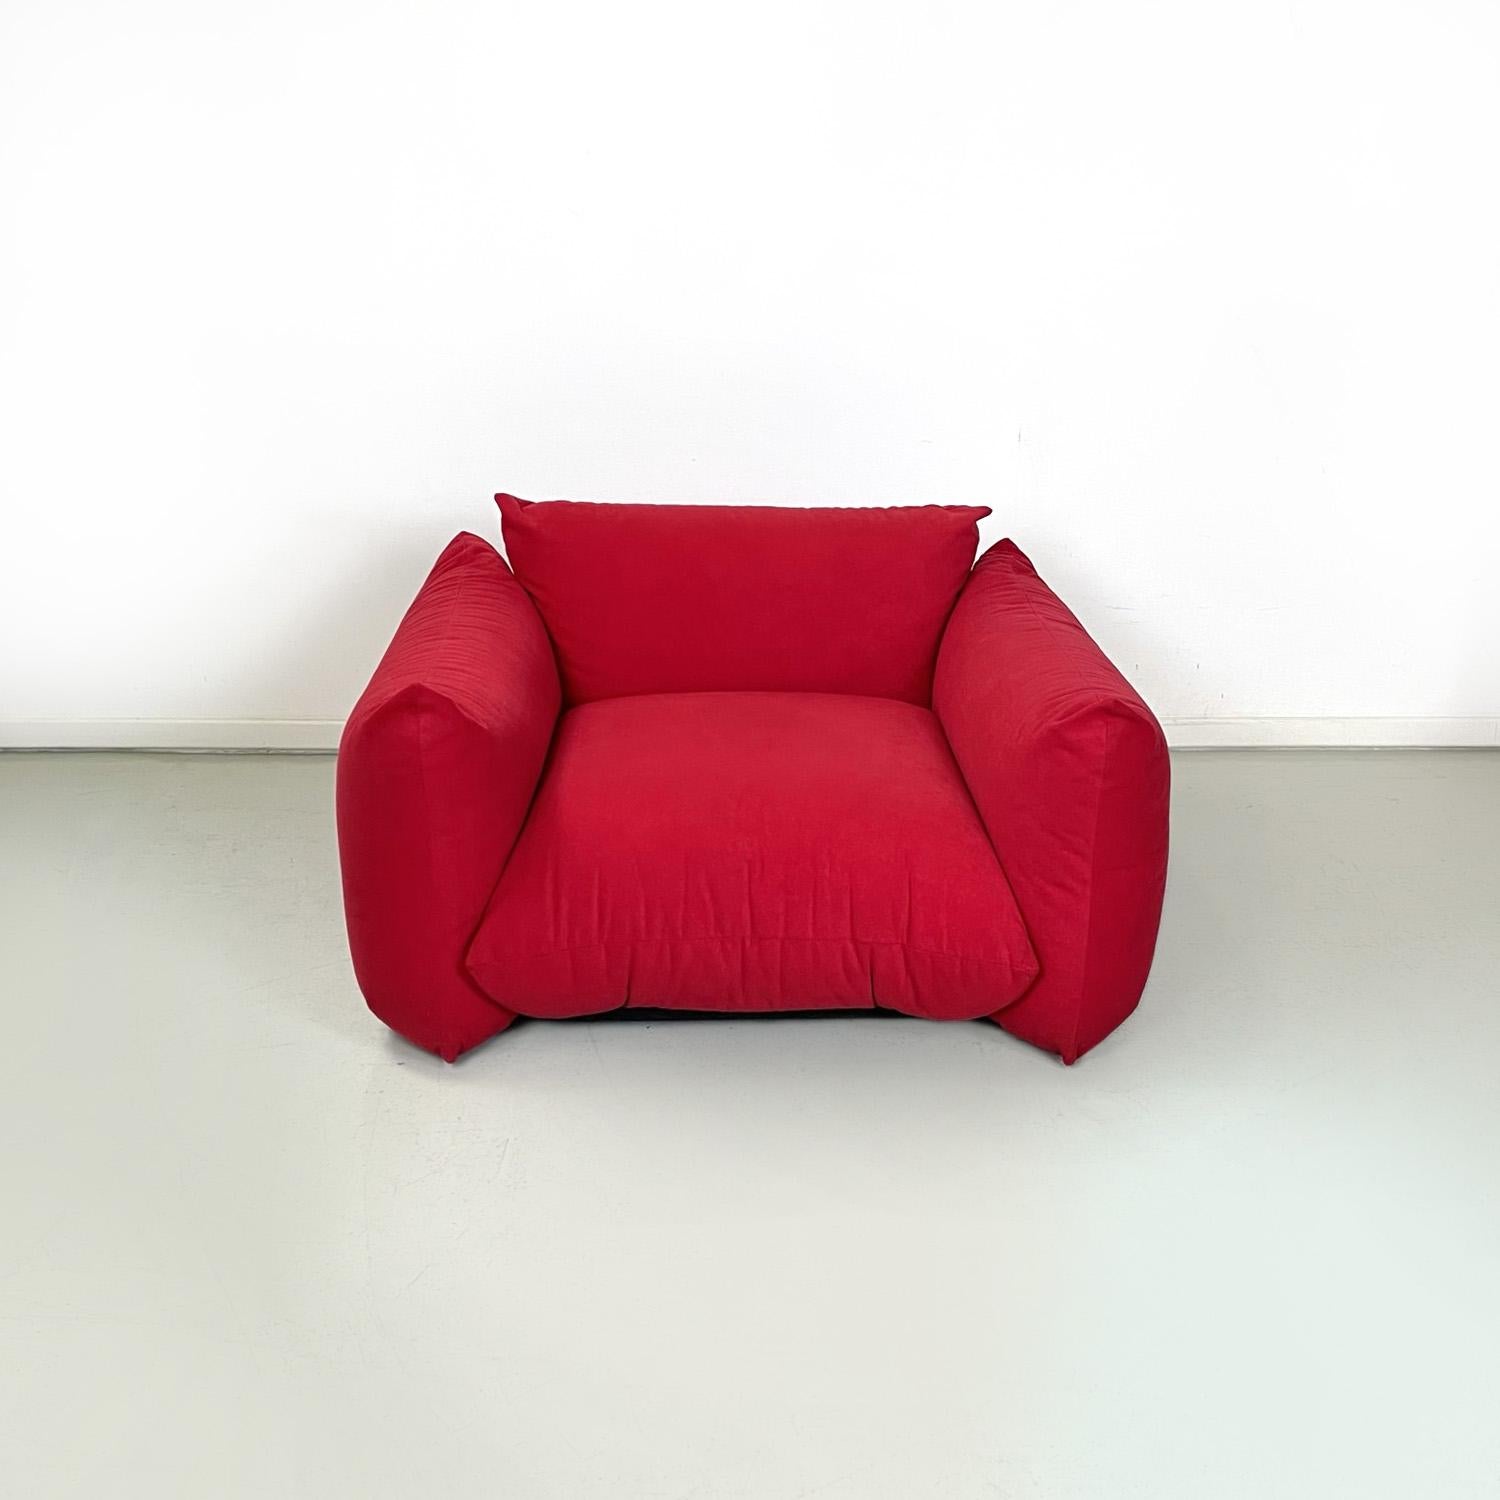 Late 20th Century Italian modern red living room Marenco by Mario Marenco for Arflex, 1970s For Sale